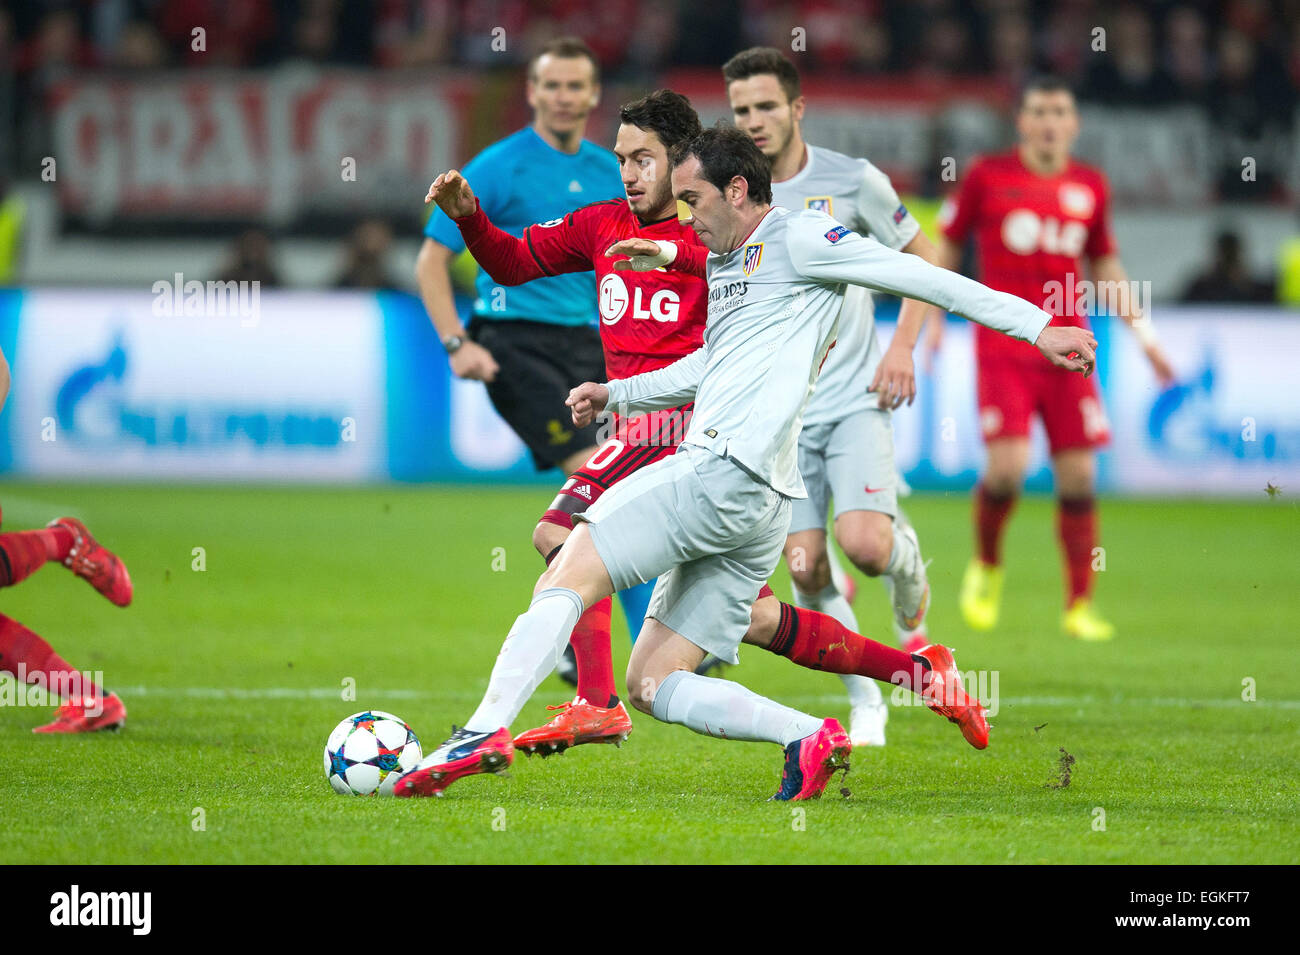 Leverkusen, Germany. 25th Feb, 2015. Leverkusen's Hakan Calhanoglu and Diego Godin compete for the ball during the Champions League round of 16 first leg match between Bayer Leverkusen and Atletico Madrid in Leverkusen, Germany, 25 February 2015. Photo: Maja Hitij/dpa/Alamy Live News Stock Photo